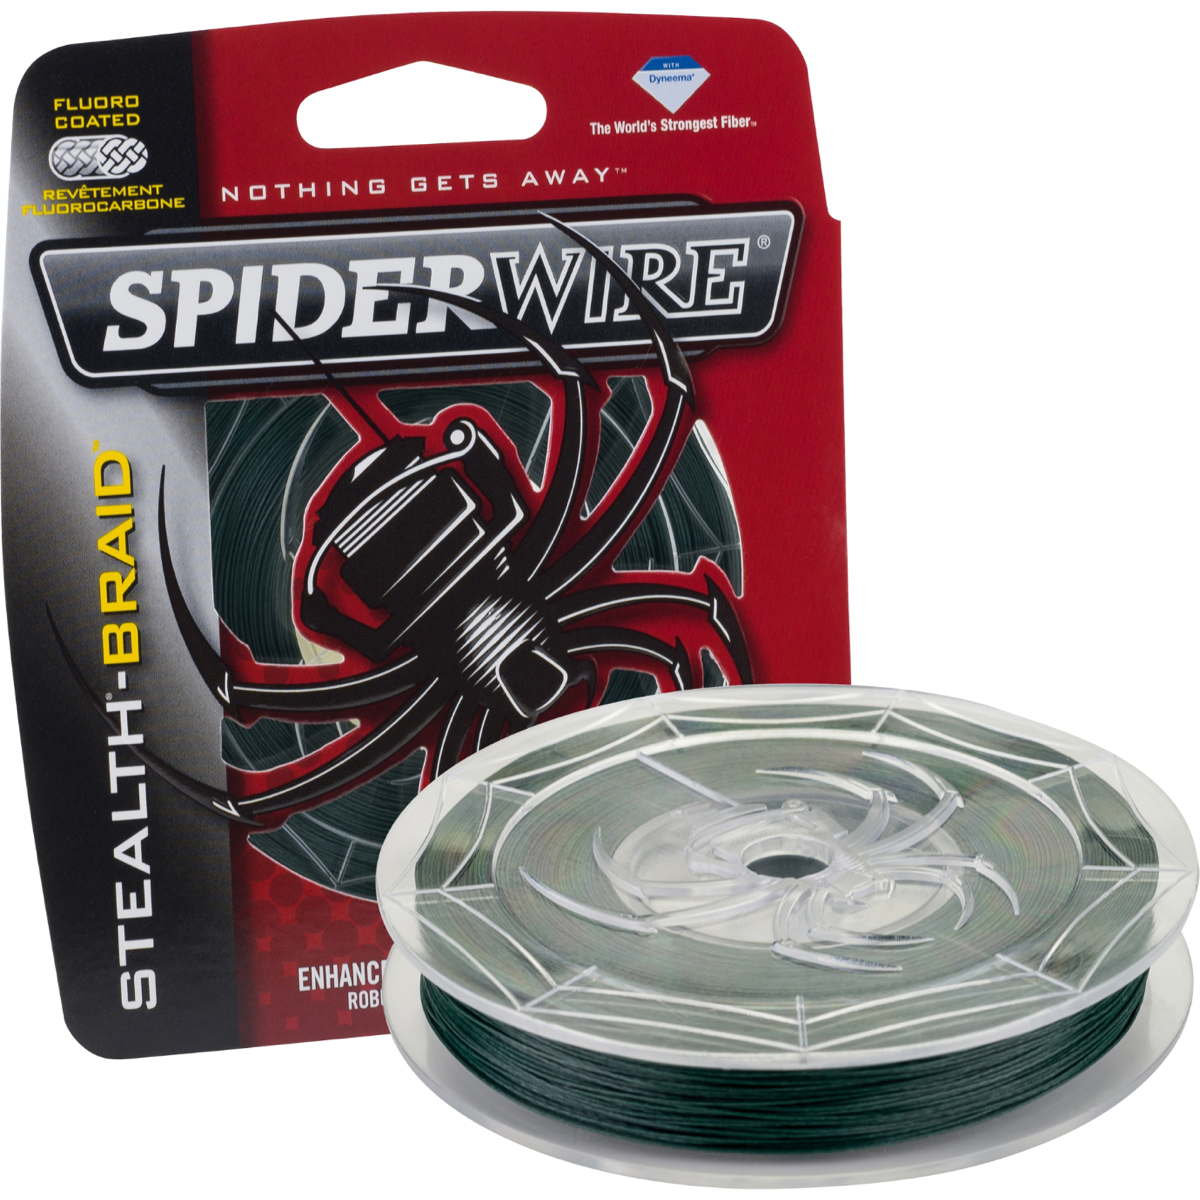 Photo of SpiderWire Braided Stealth Superline for sale at United Tackle Shops.